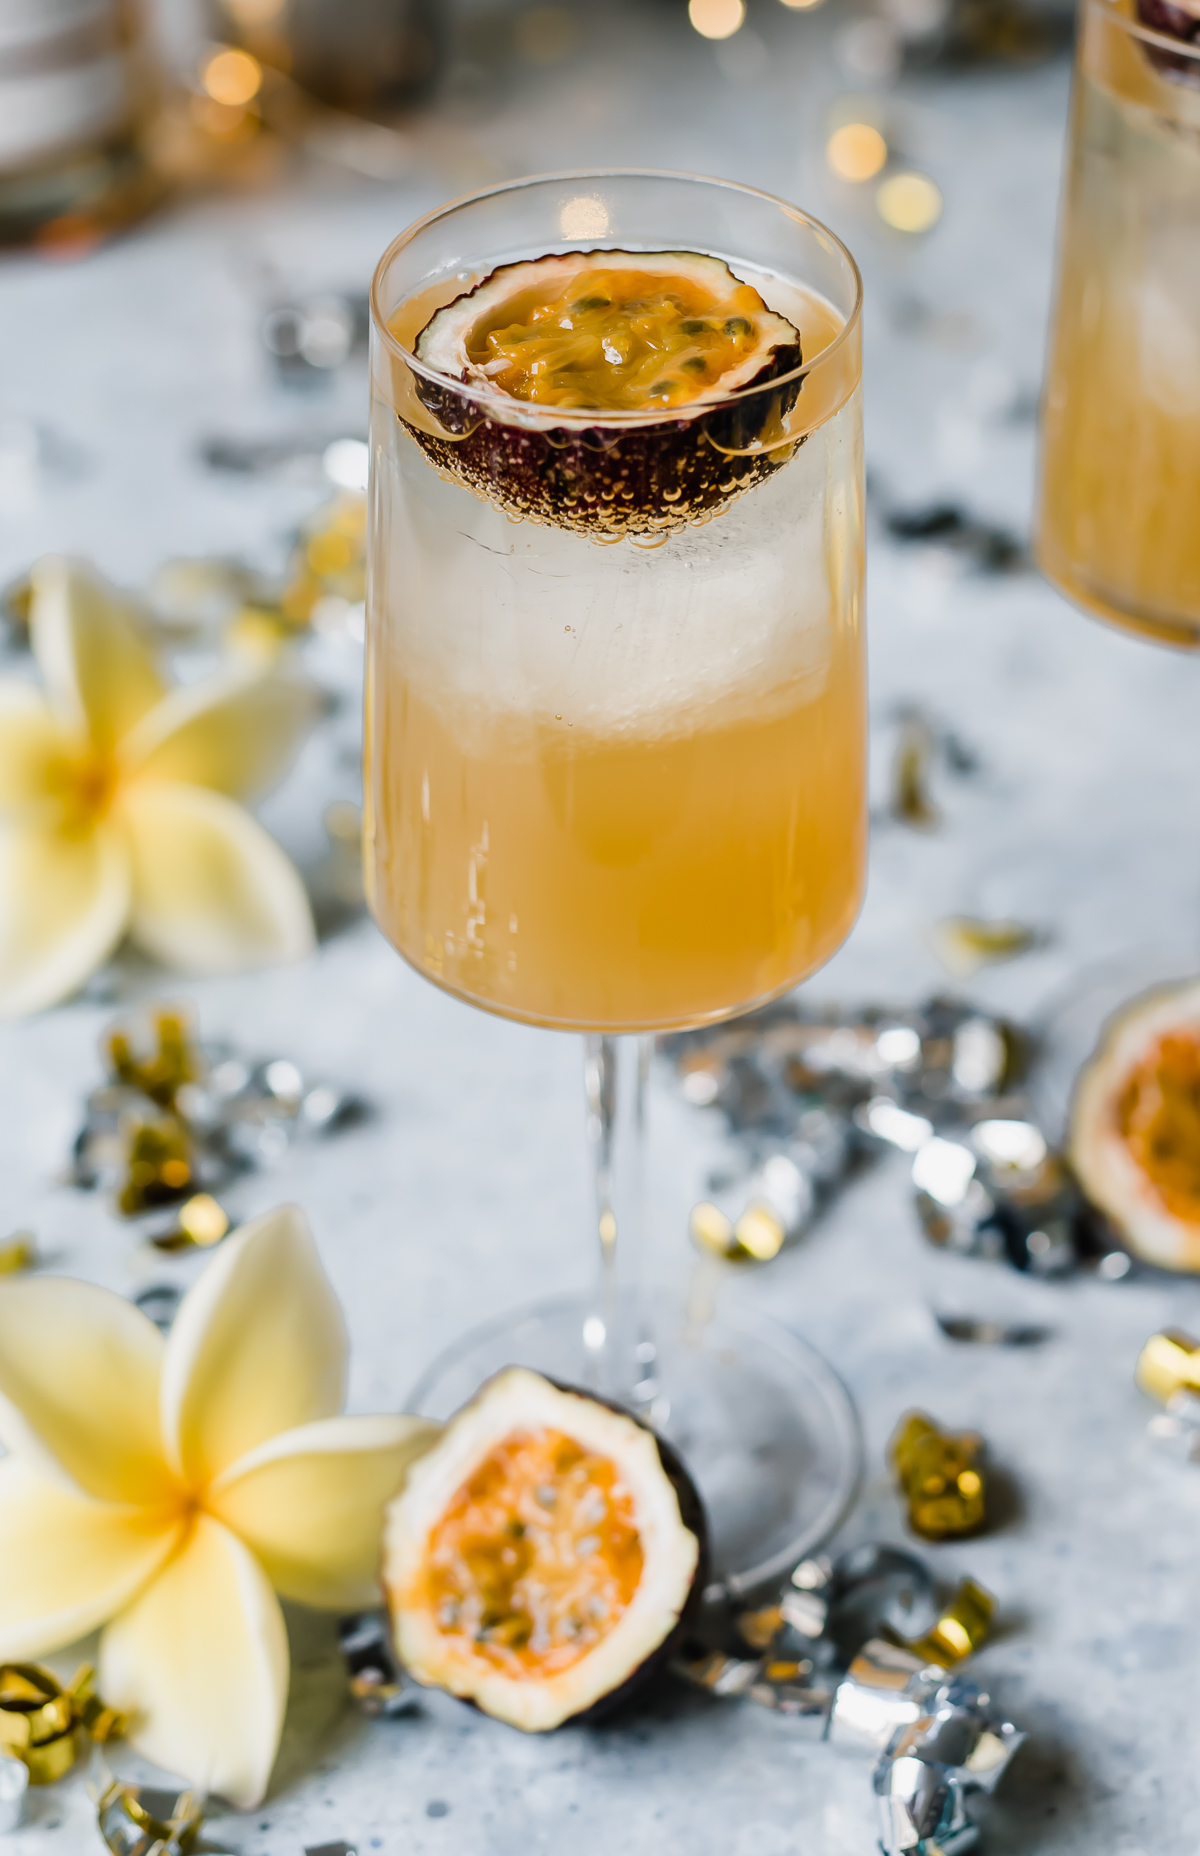 Sweet and sour passionfruit rum fizz cocktail orange liquid in glass with passionfruit half